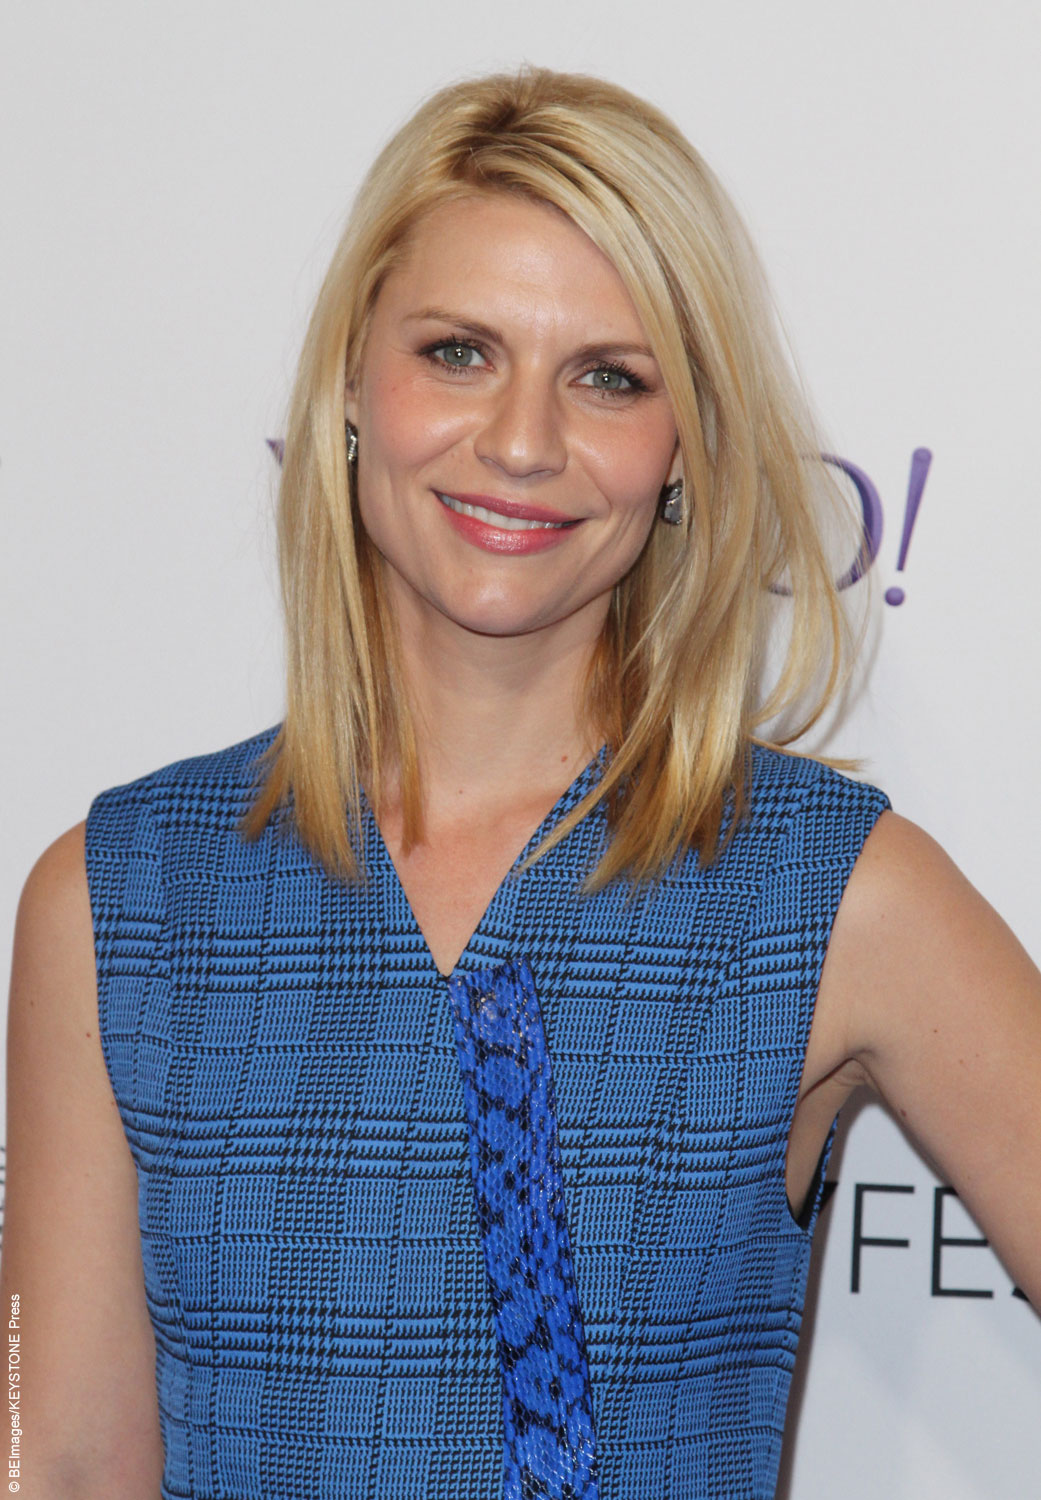 Claire Danes earns $250,000 an episode for her starring role on Homeland, which debuted in 2011. Playing Carrie Mathison, Claire has won two Golden Globes and three Emmy awards for her work on the Showtime series.